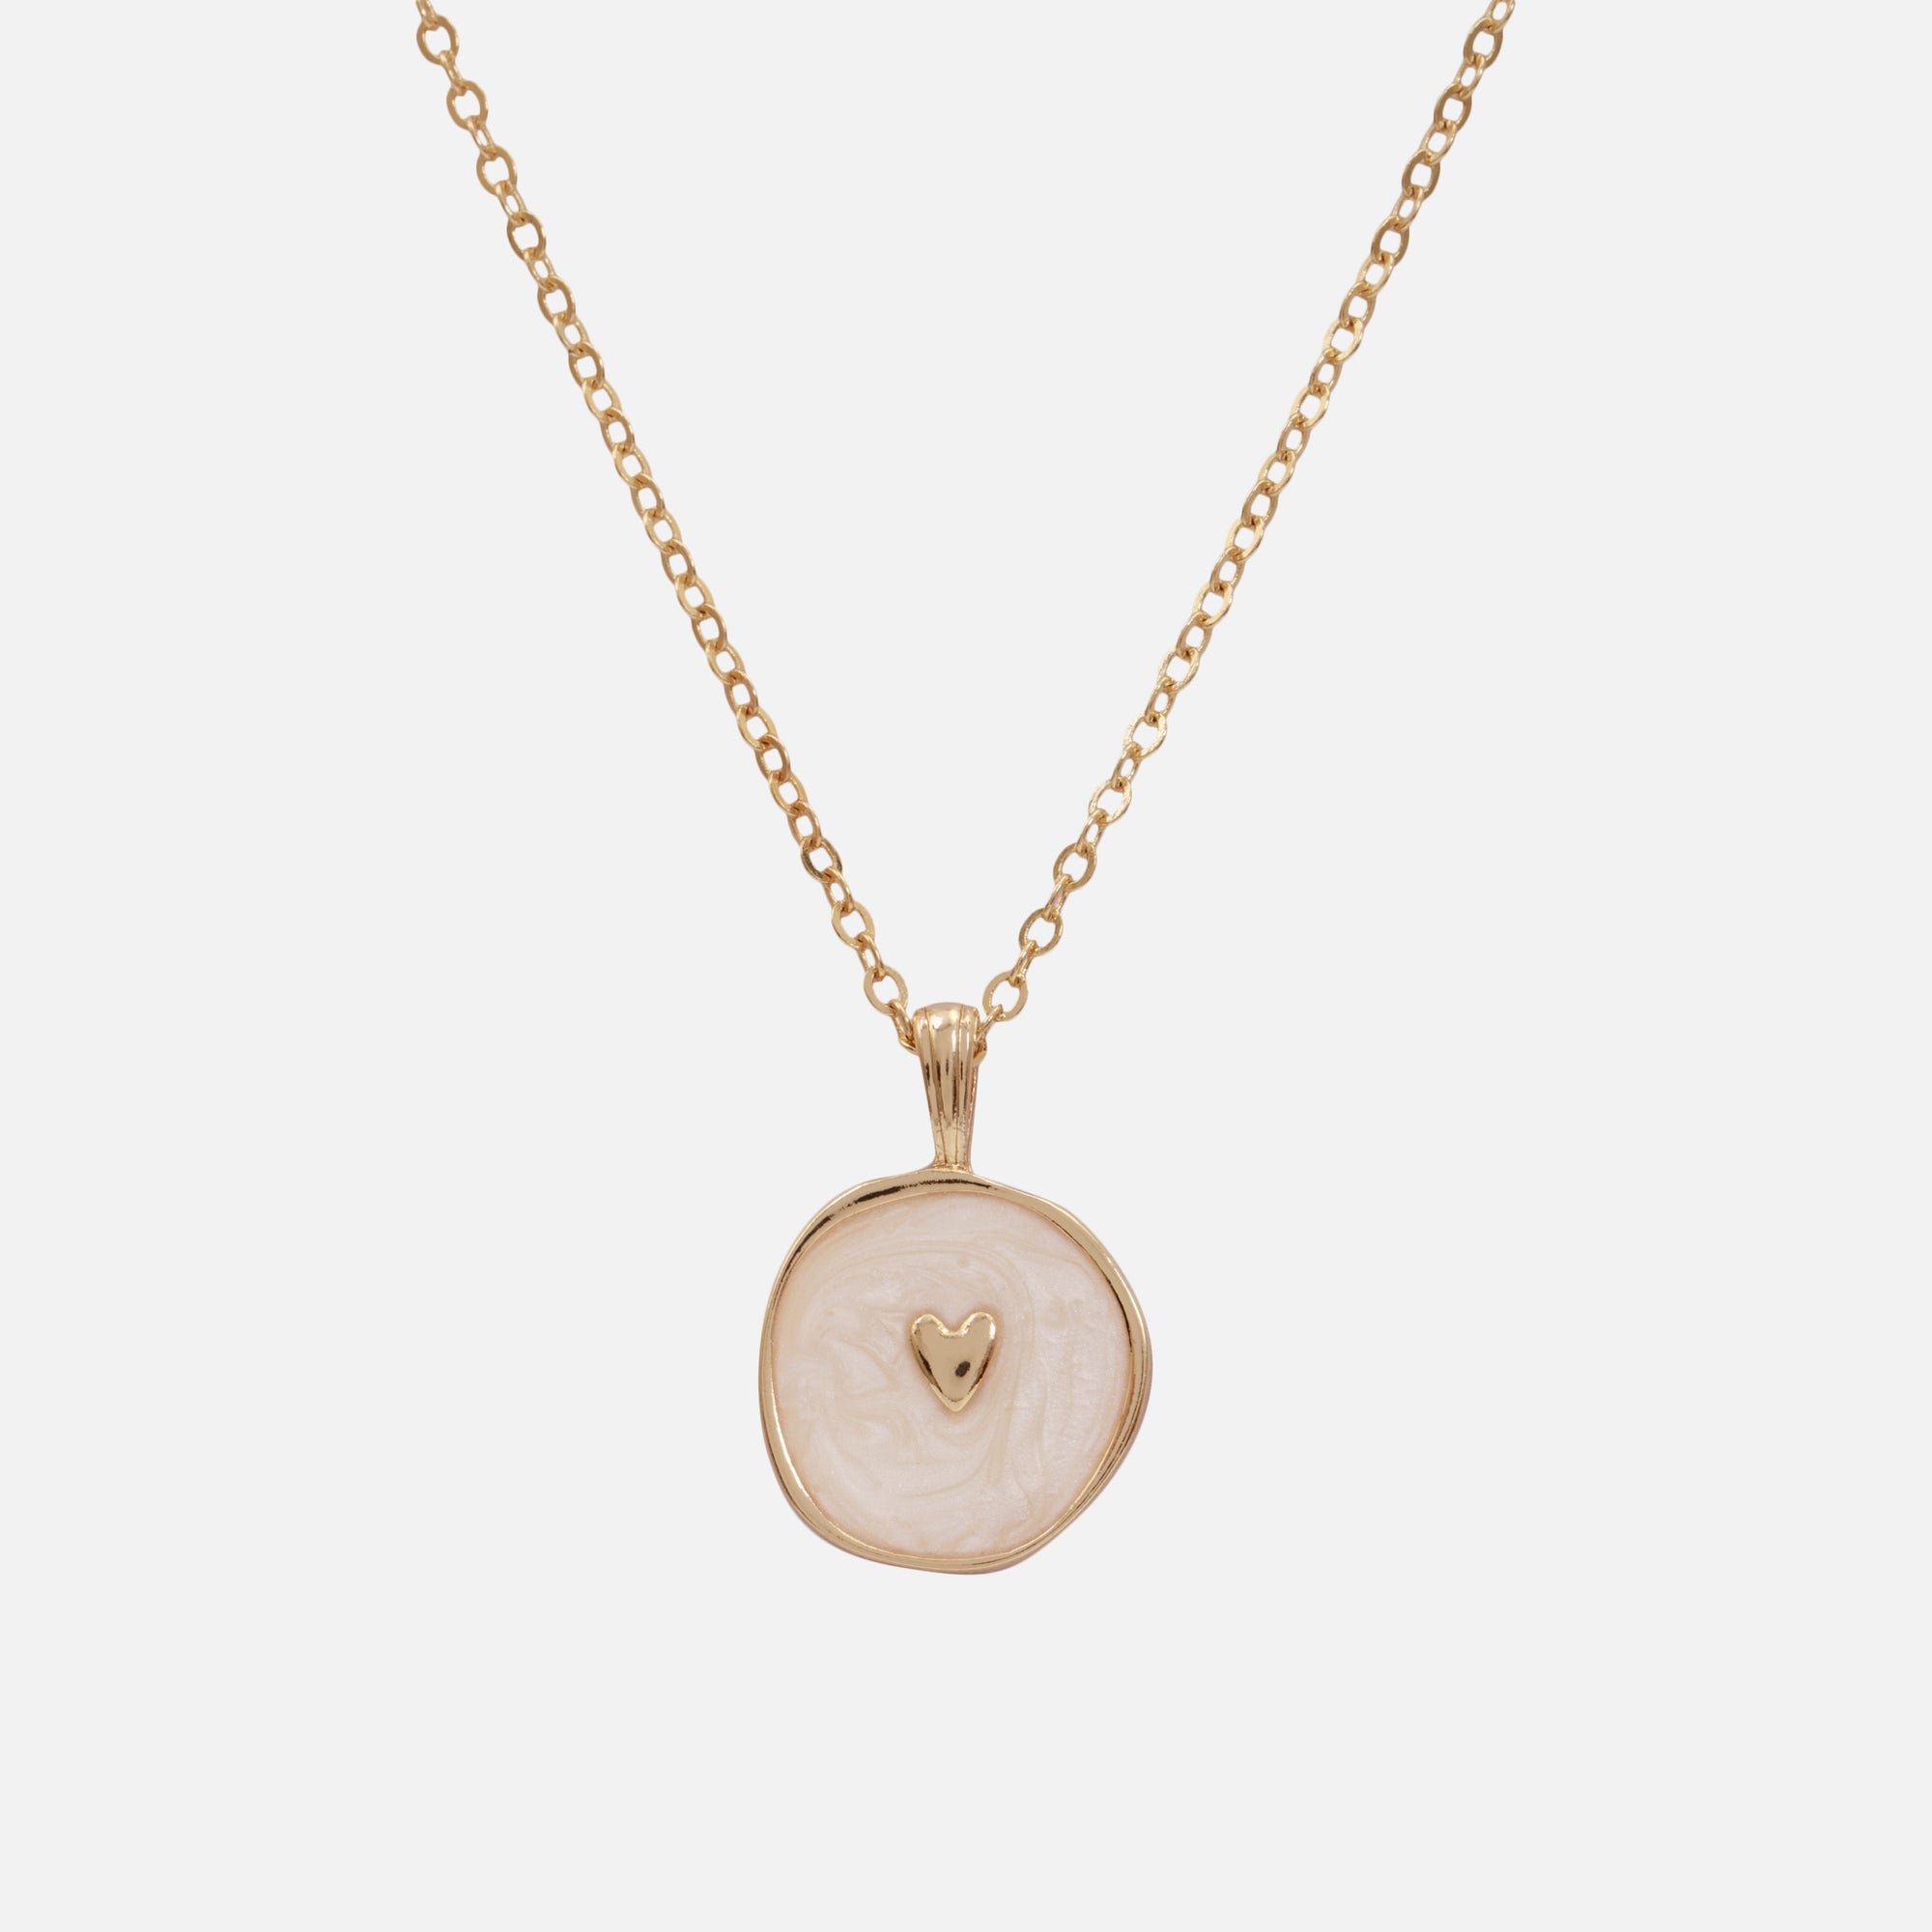 Necklace with white medallion and golden heart